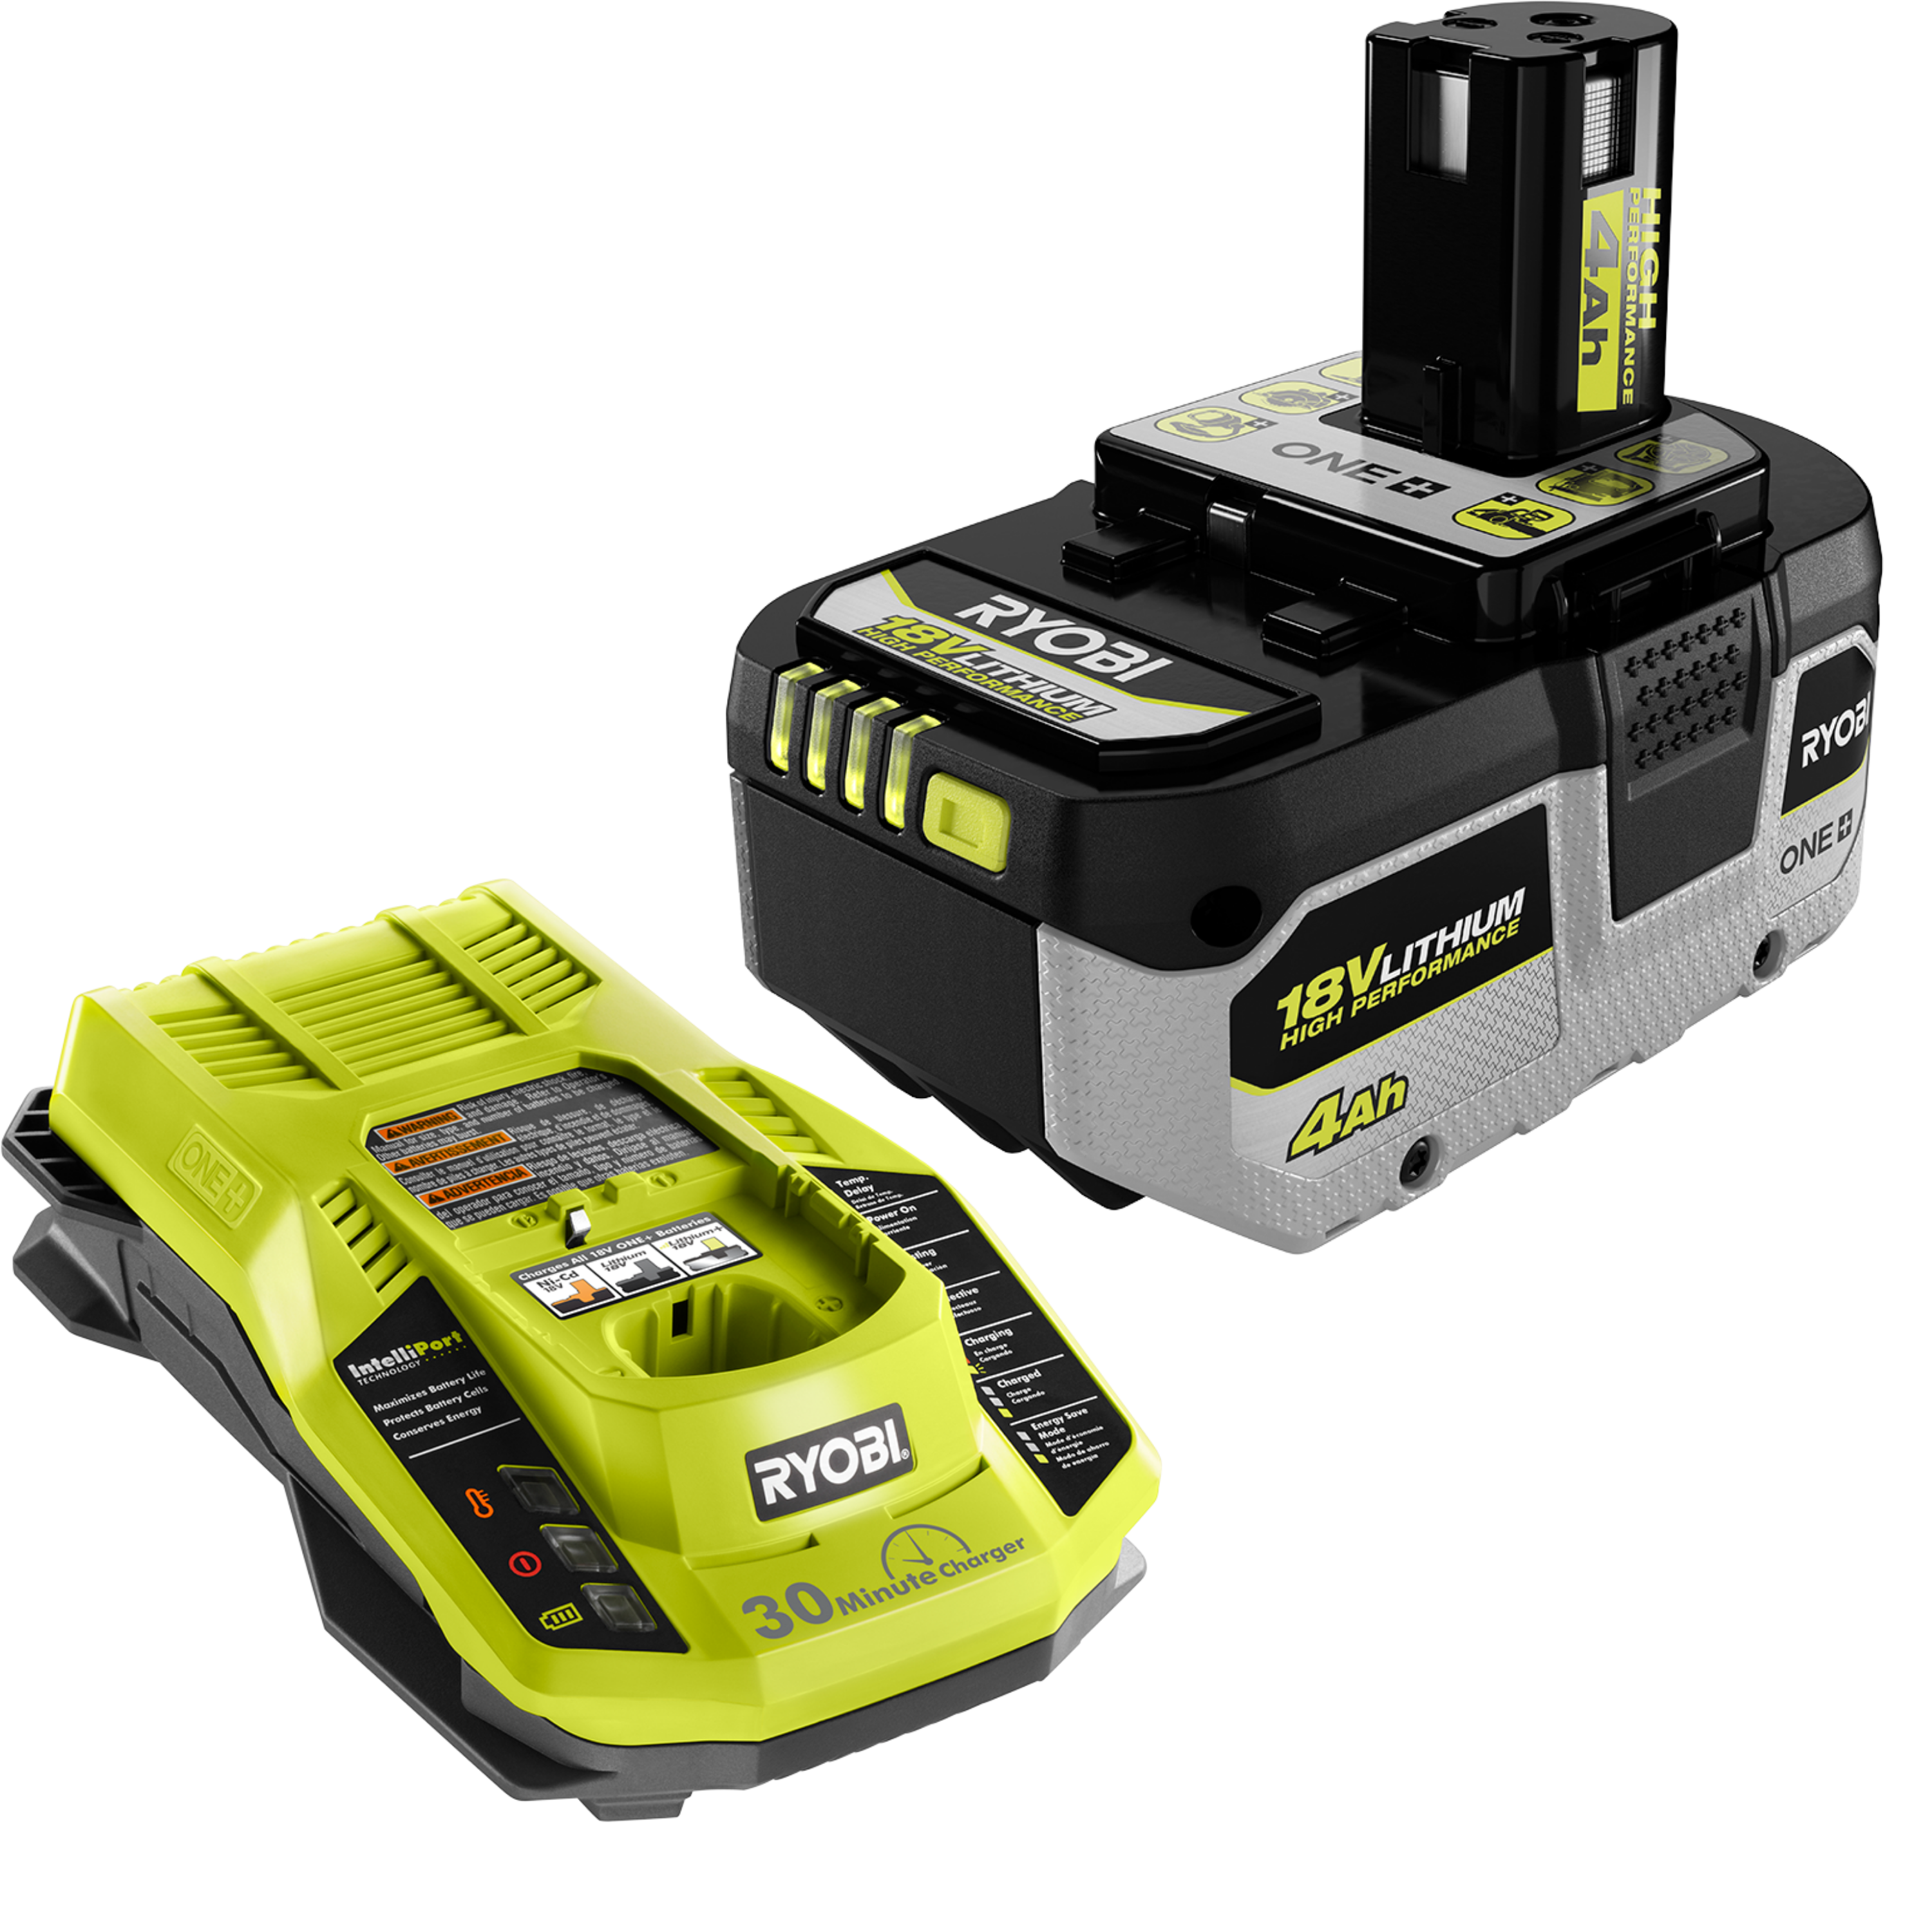 Feature Image for 18V ONE+ 4.0Ah High Performance Battery and Charger Starter Kit.